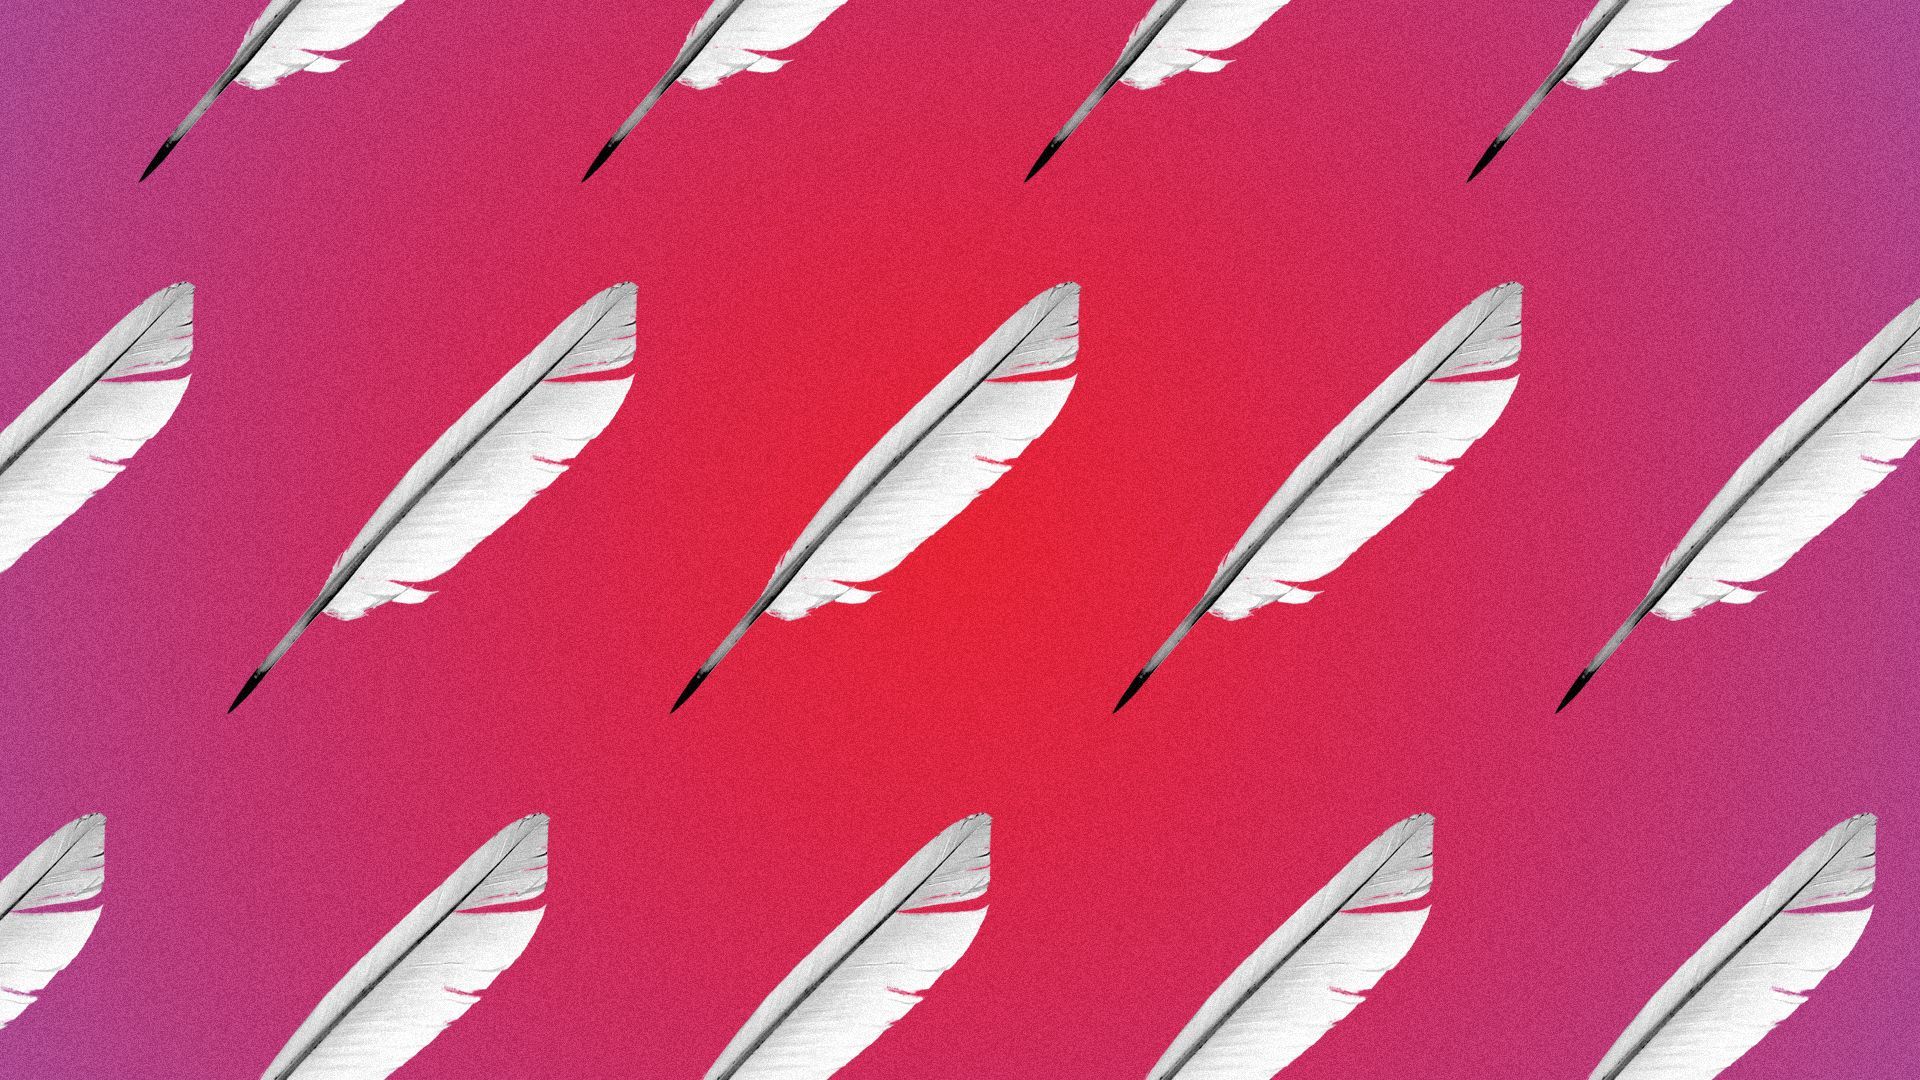 Illustration of a pattern of quills. 